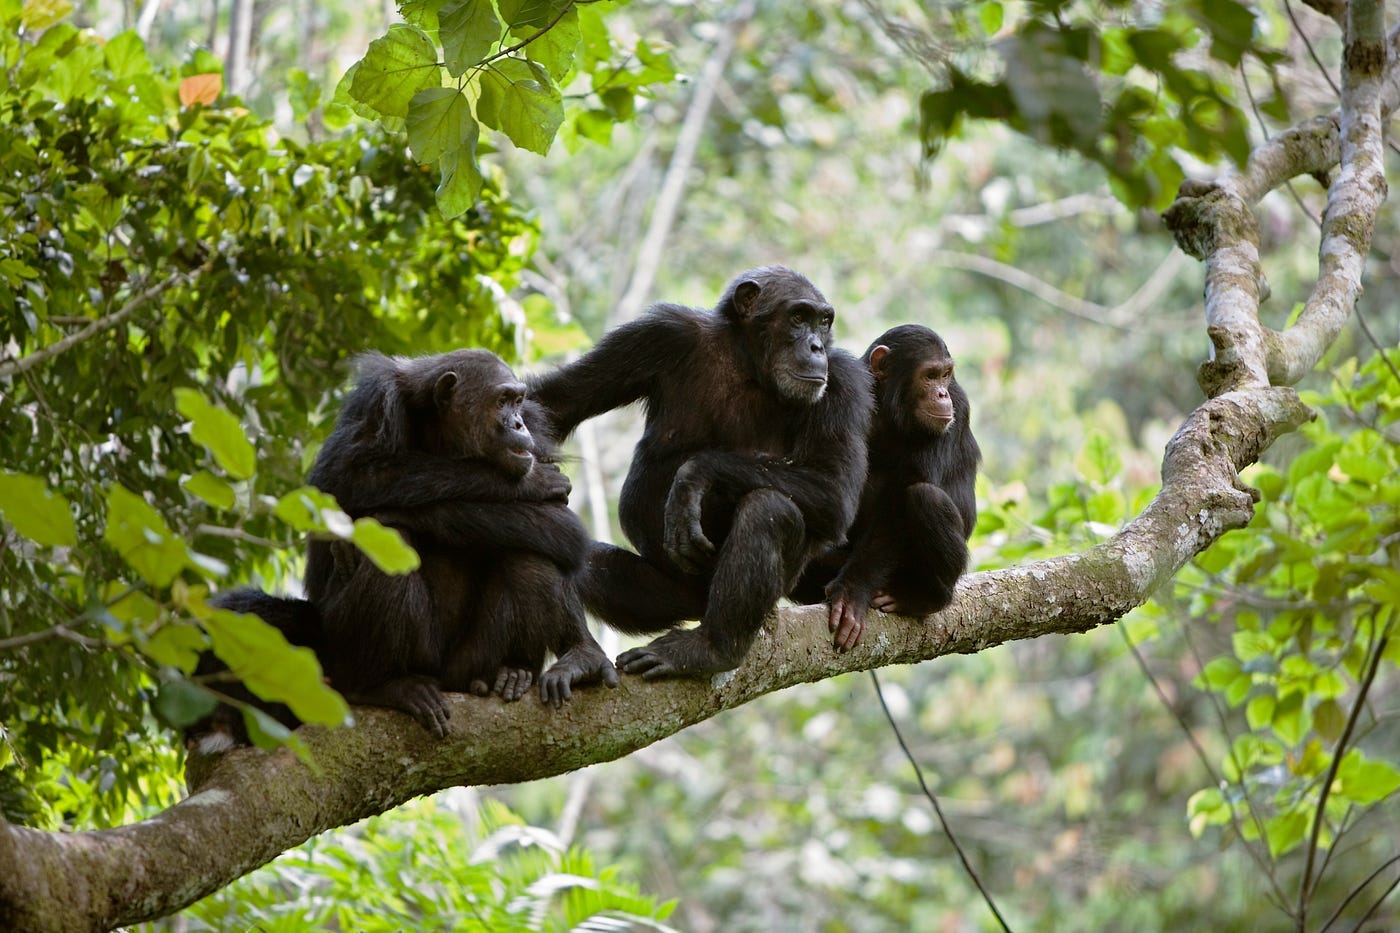 Three chimps looking out across the jungle.